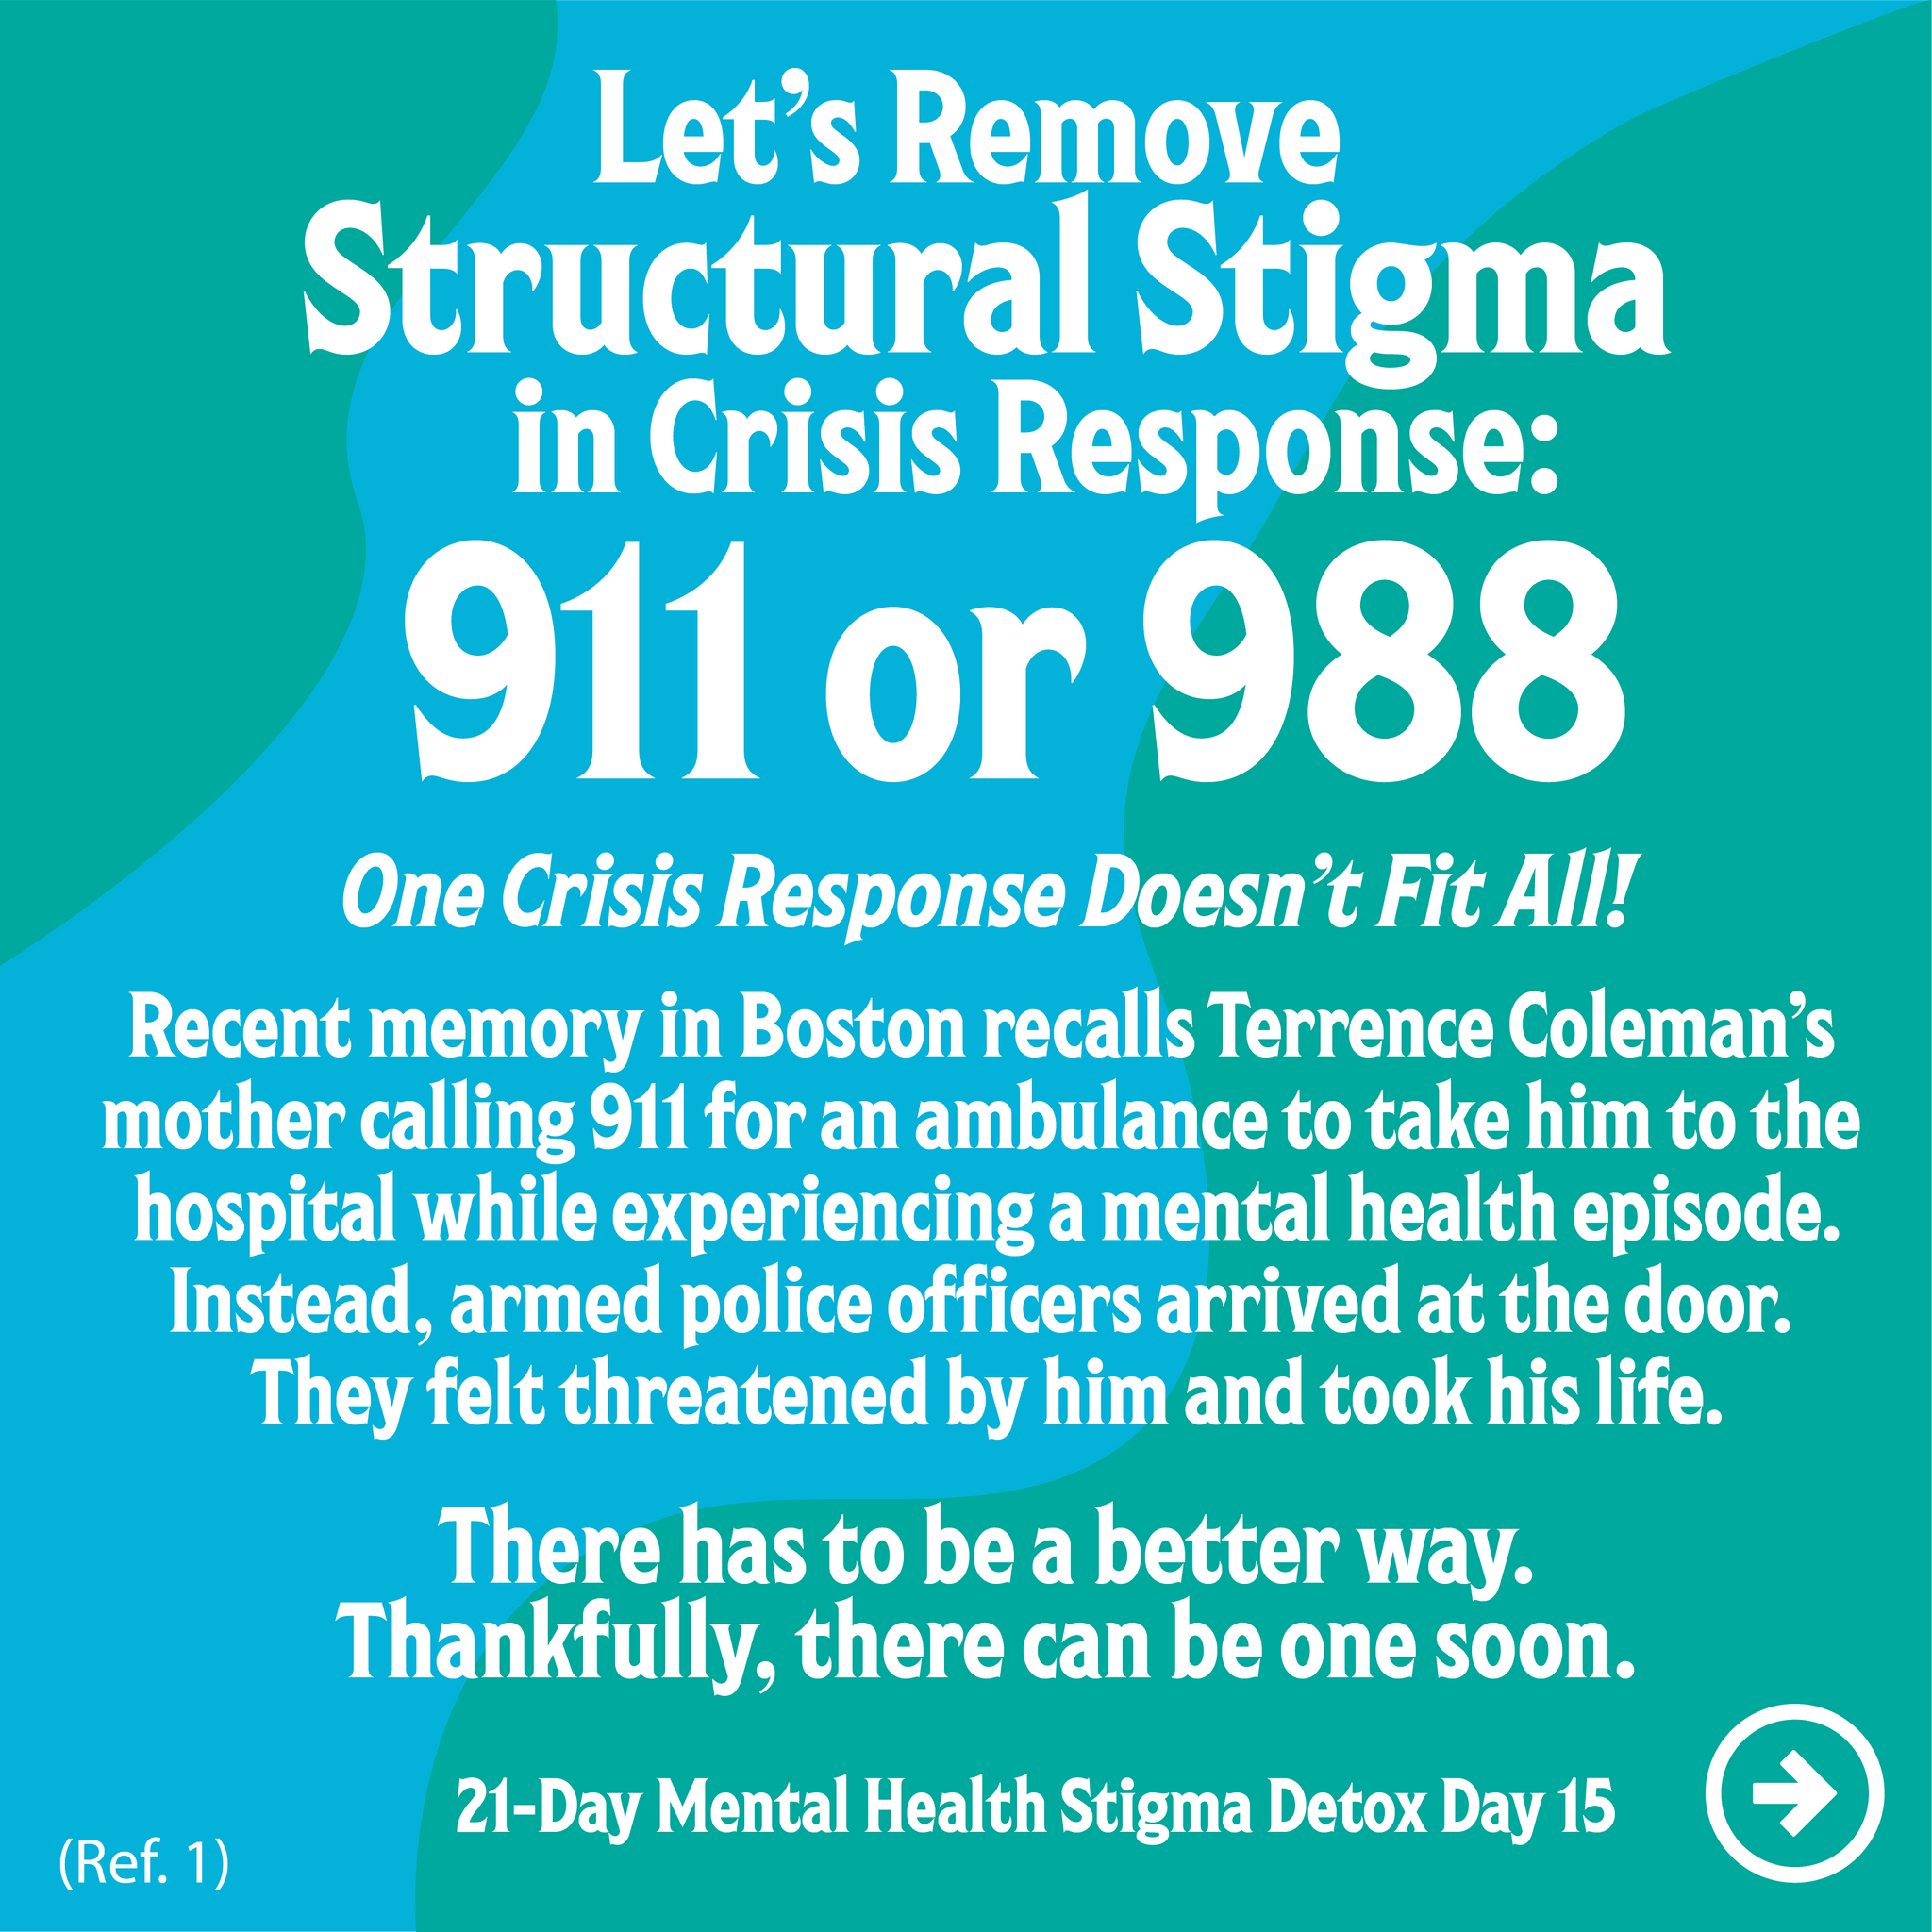 Let's Remove Structural Stigma in Crisis Response: 911 or 988 - One Crisis Response Doesn’t Fit All! MHSD Day 15